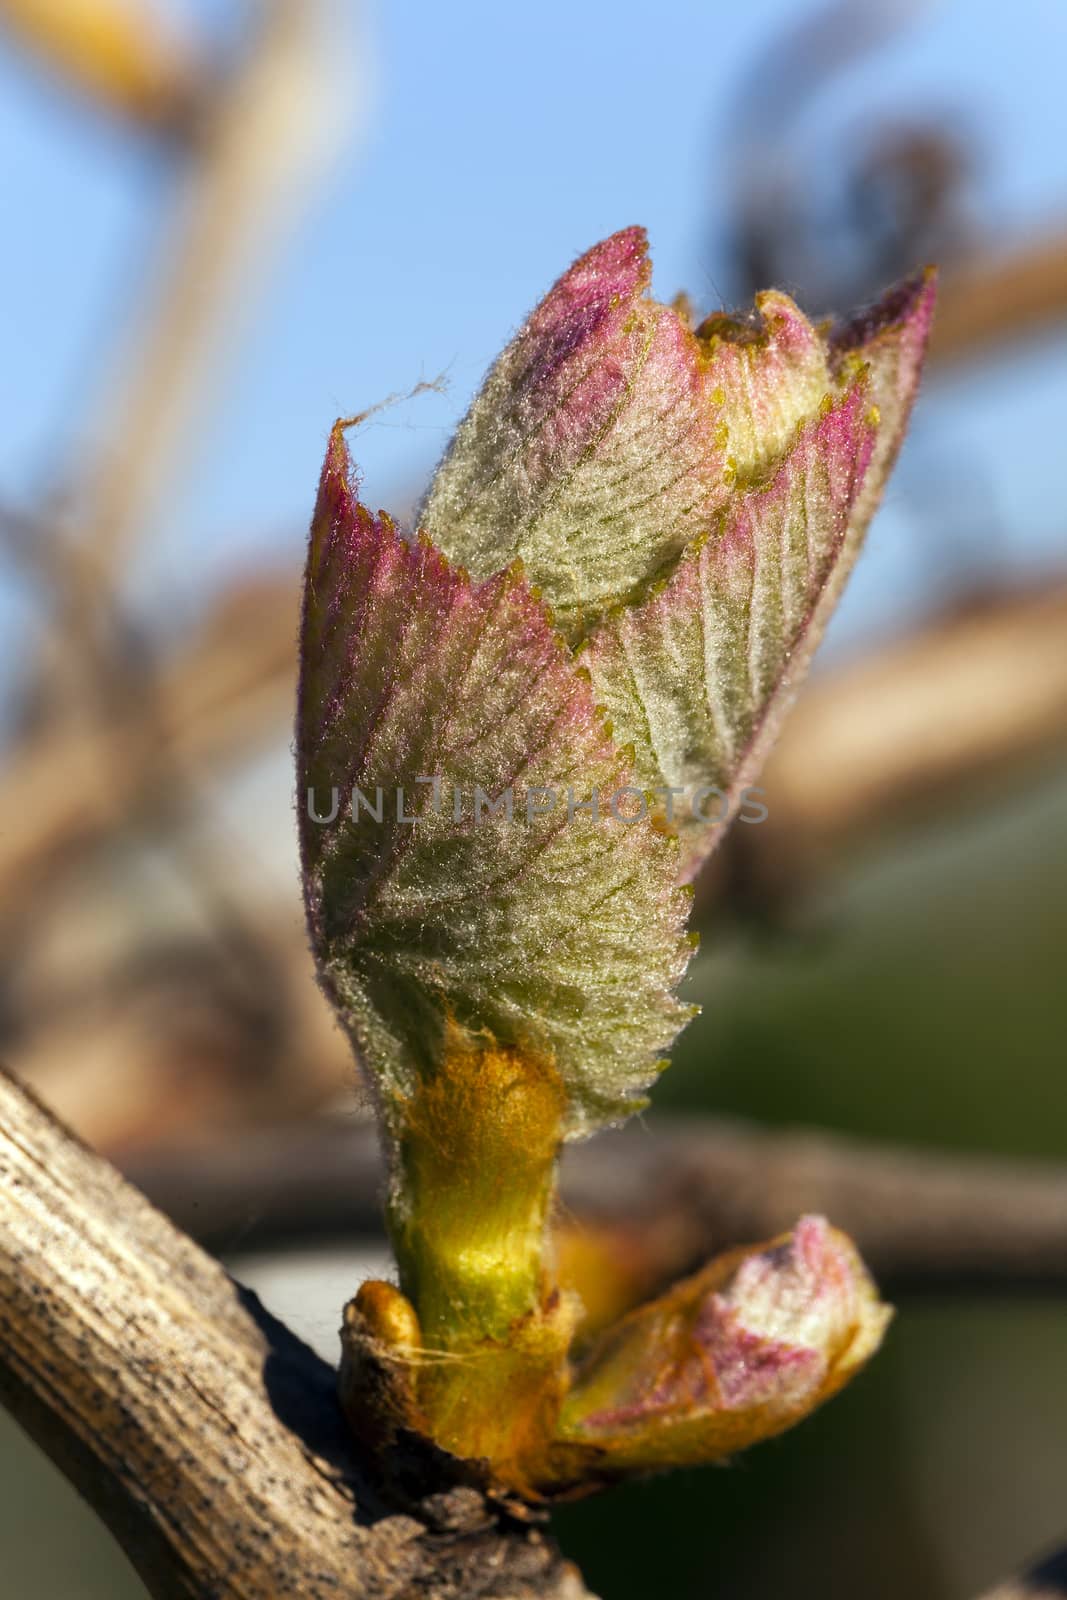   some first leaves of the grapes, grown in a spring season